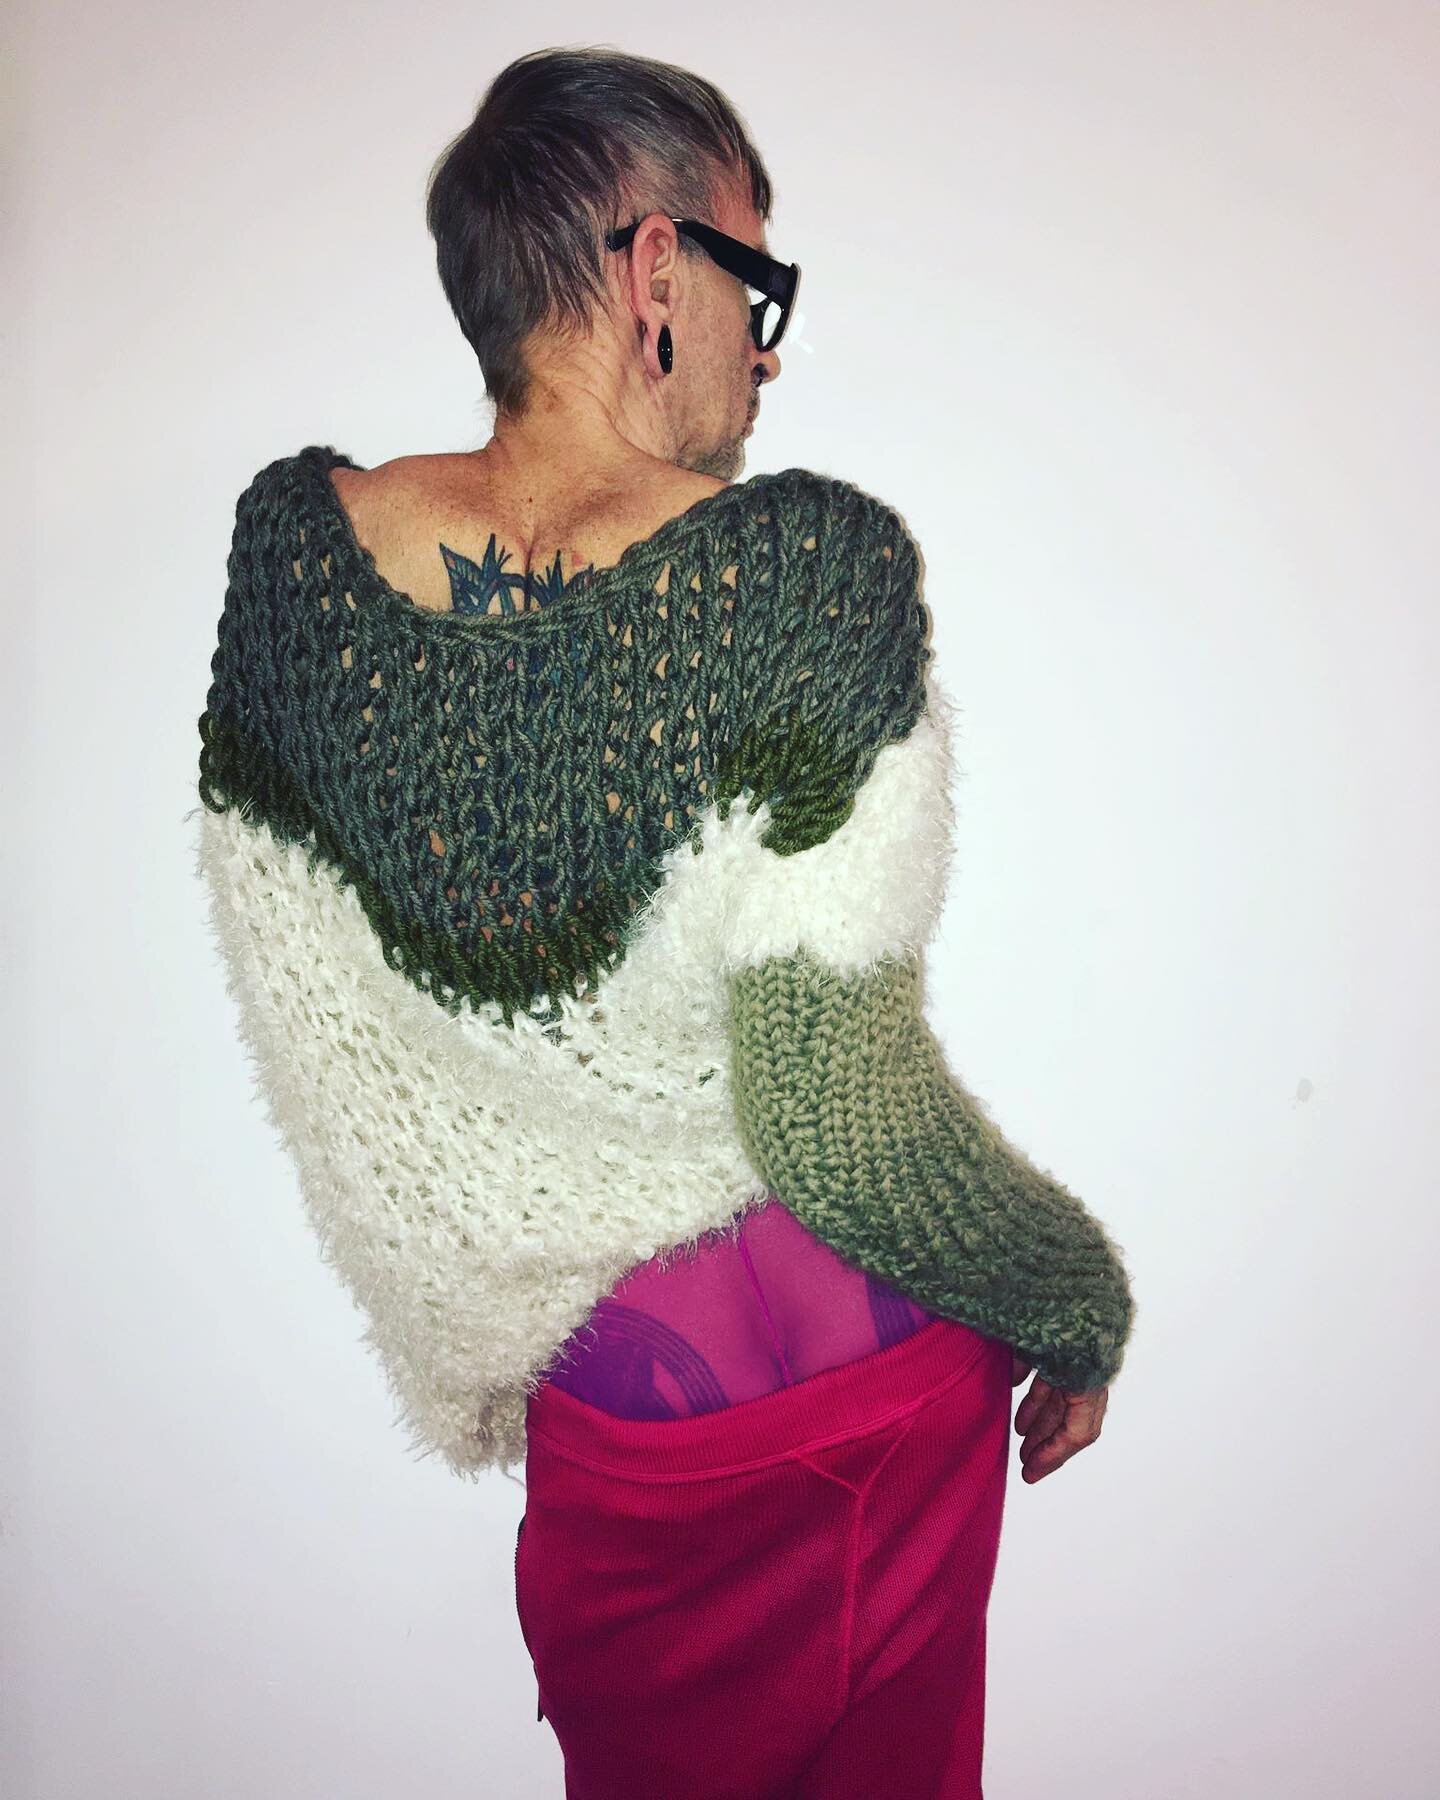 and the last up to now,second version of the low back sweater
#knitting #knitwear #knit #strikeapose #sweater #d&eacute;collet&eacute; #backside #lowback #pose #queer #queerknit #queerknitter #queerknitters #queerinstagram #queerme #gay #gayguy #inke